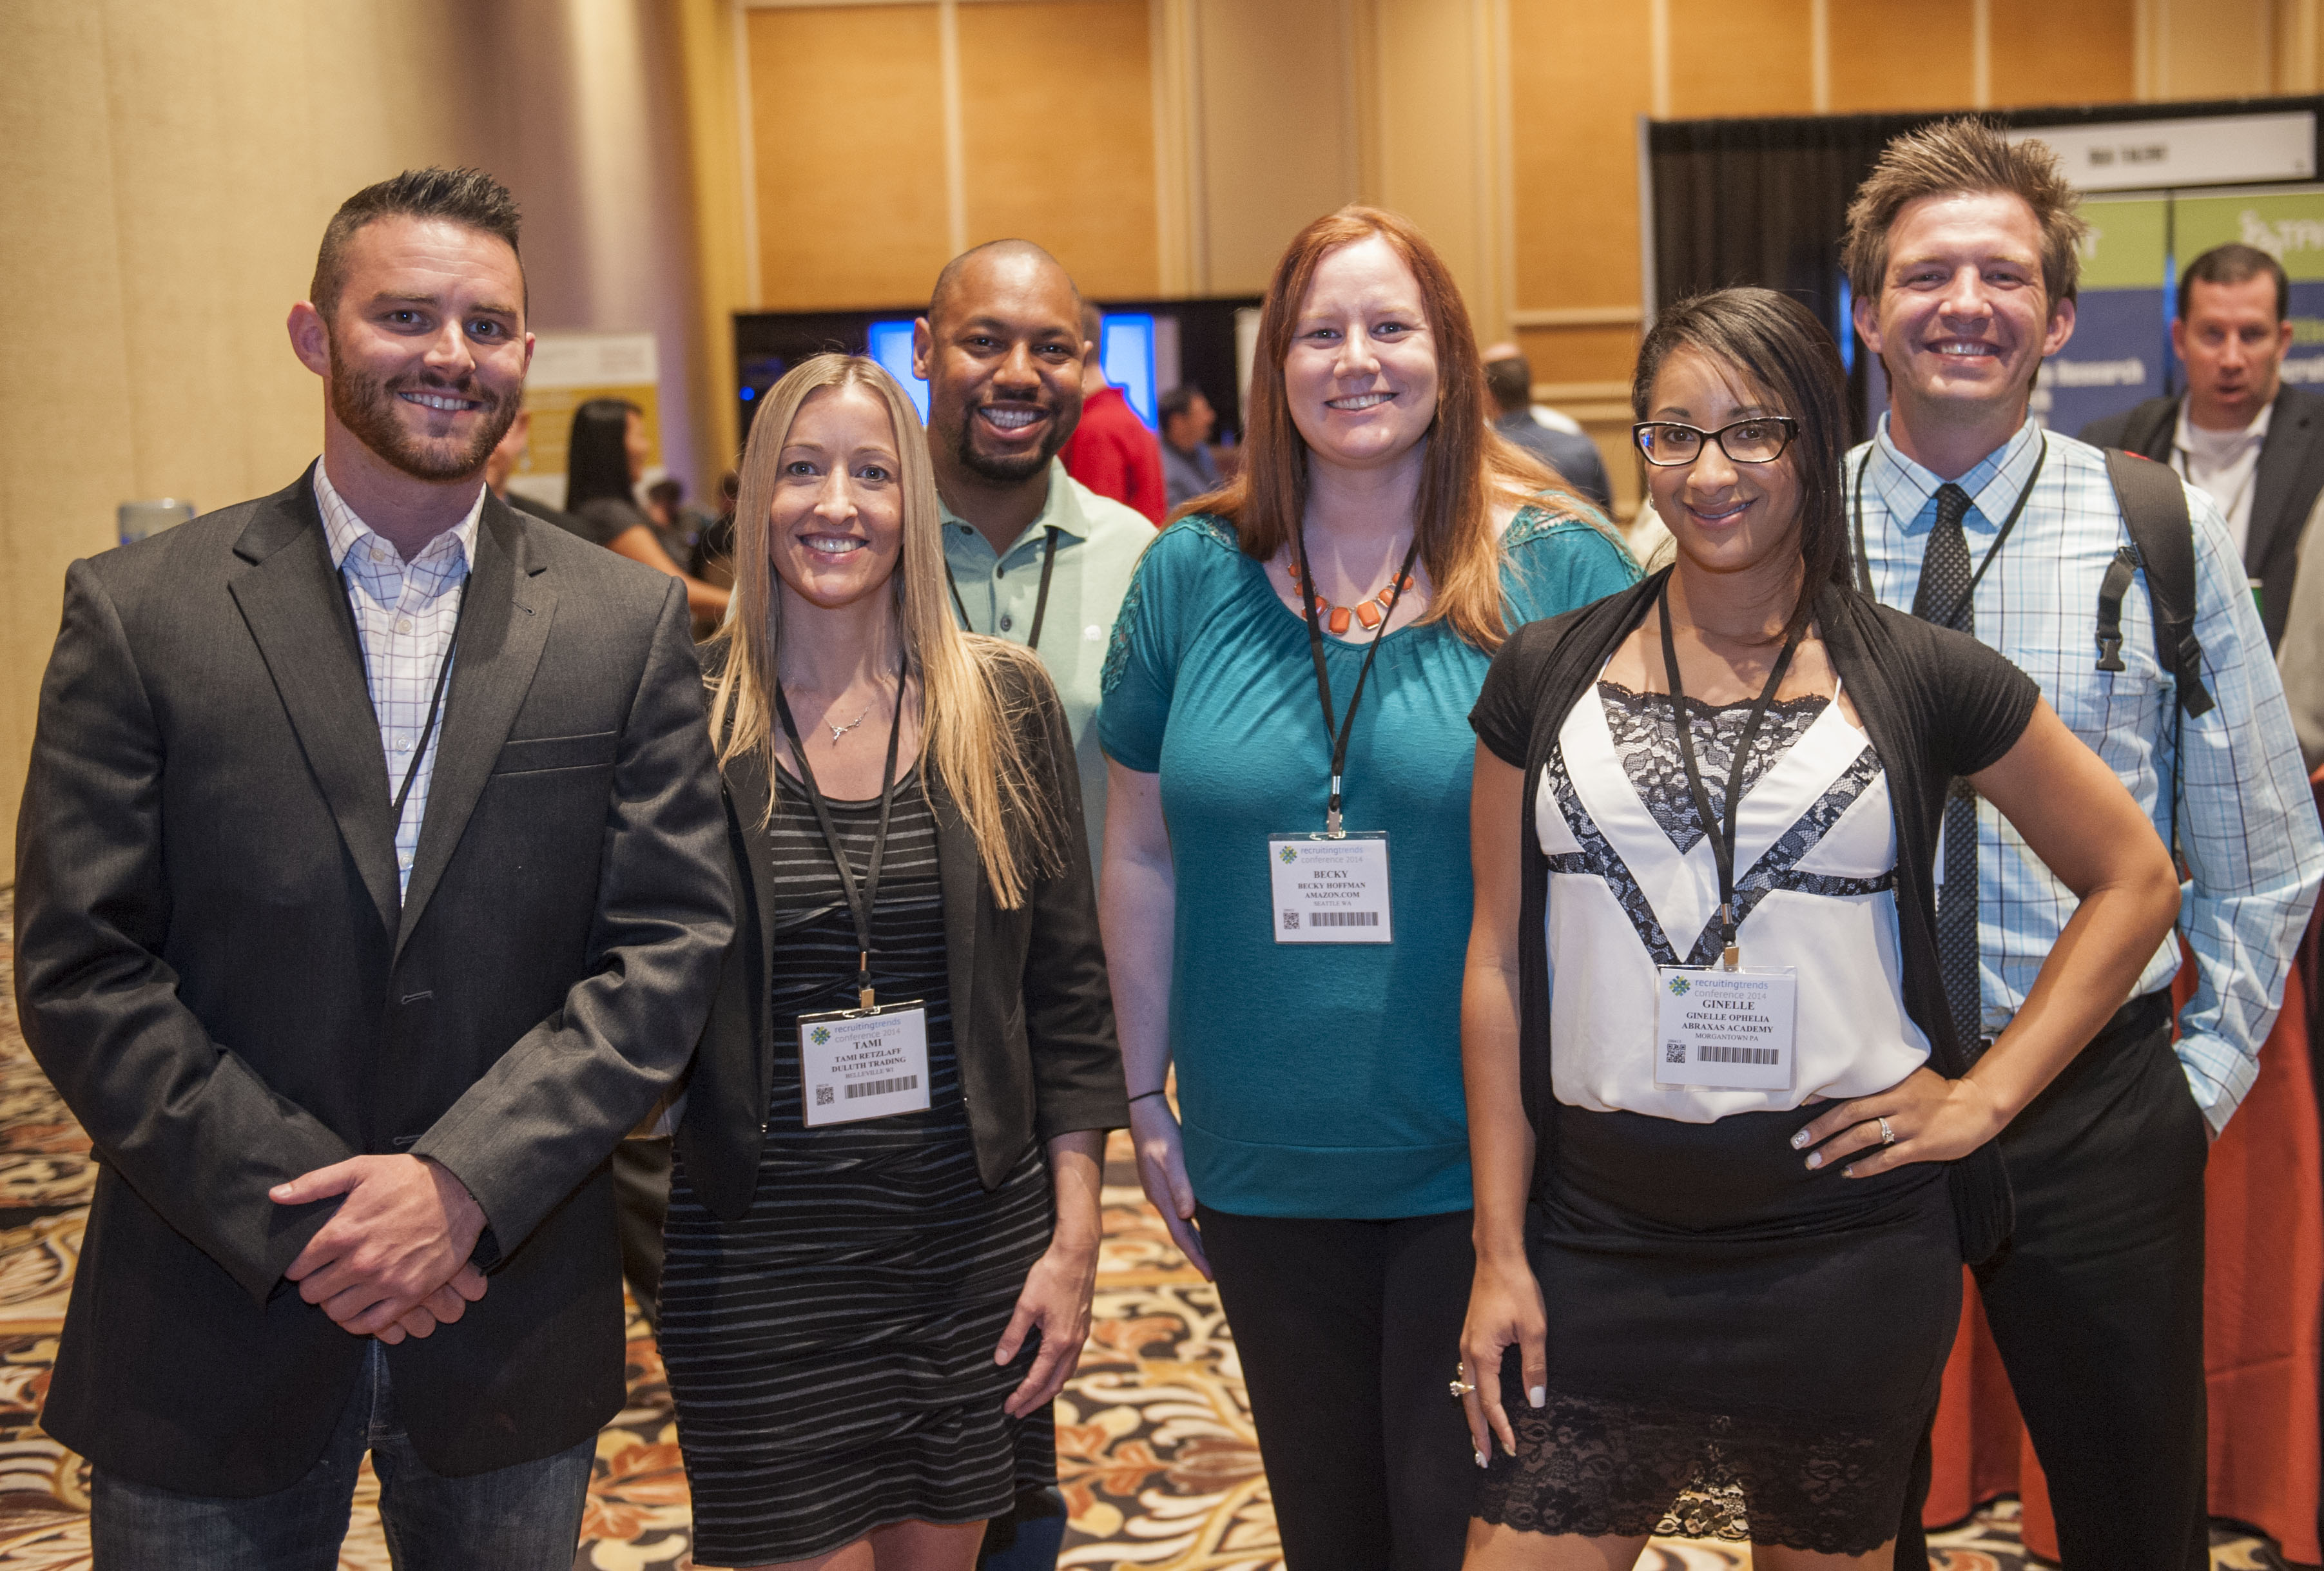 Networking Opportunities are a highlight at the Recruiting Trends Conference